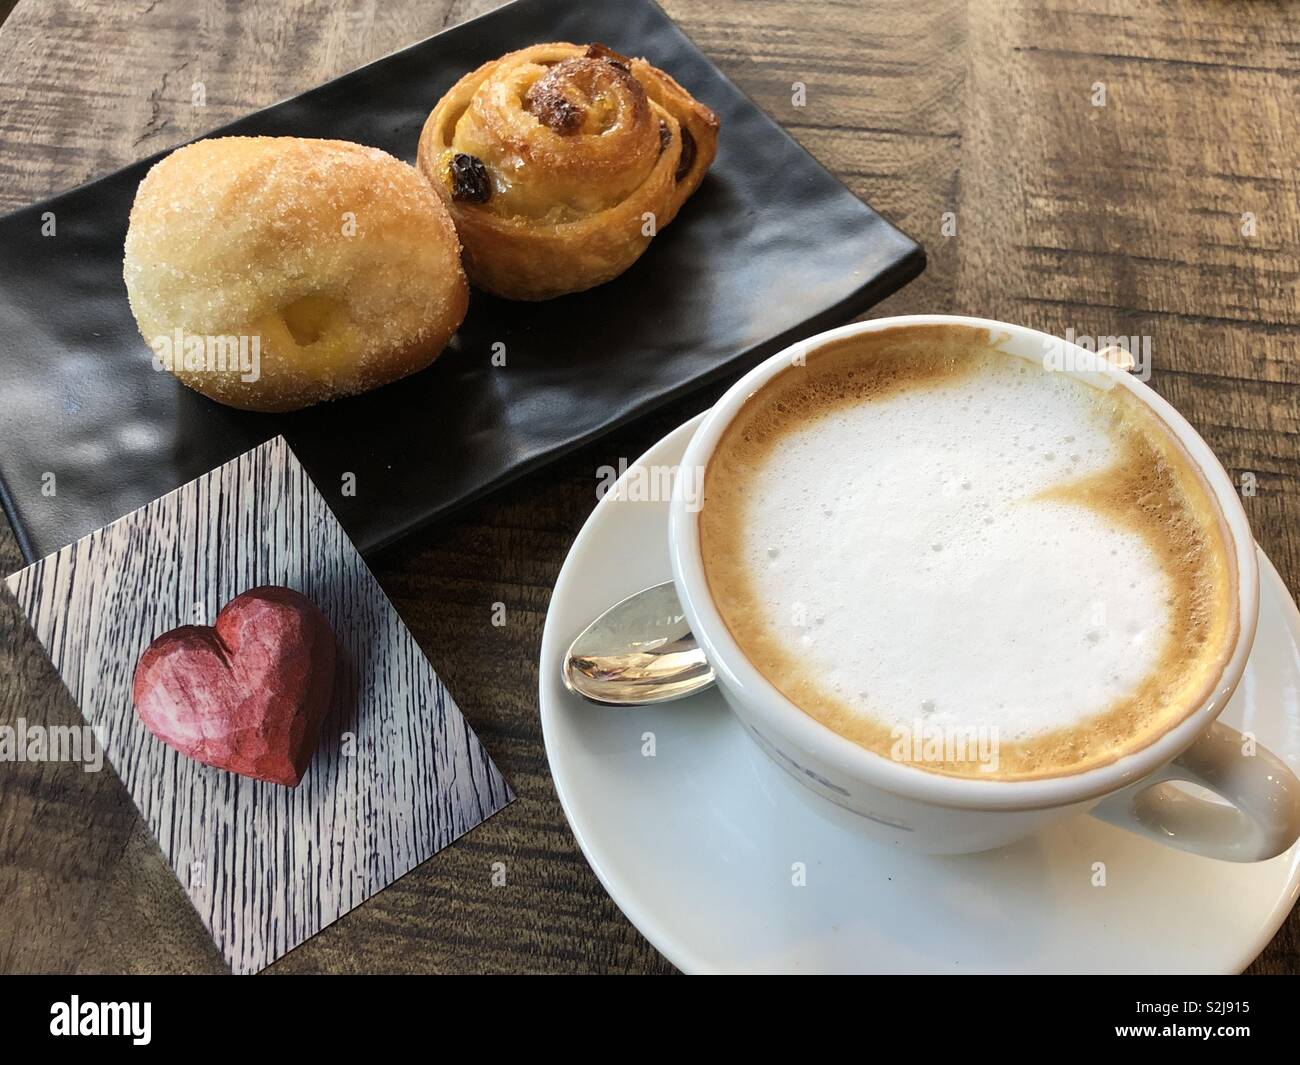 Very Sweet Italian Breakfast With Morning Pastries And A Cappuccino Stock Photo Alamy